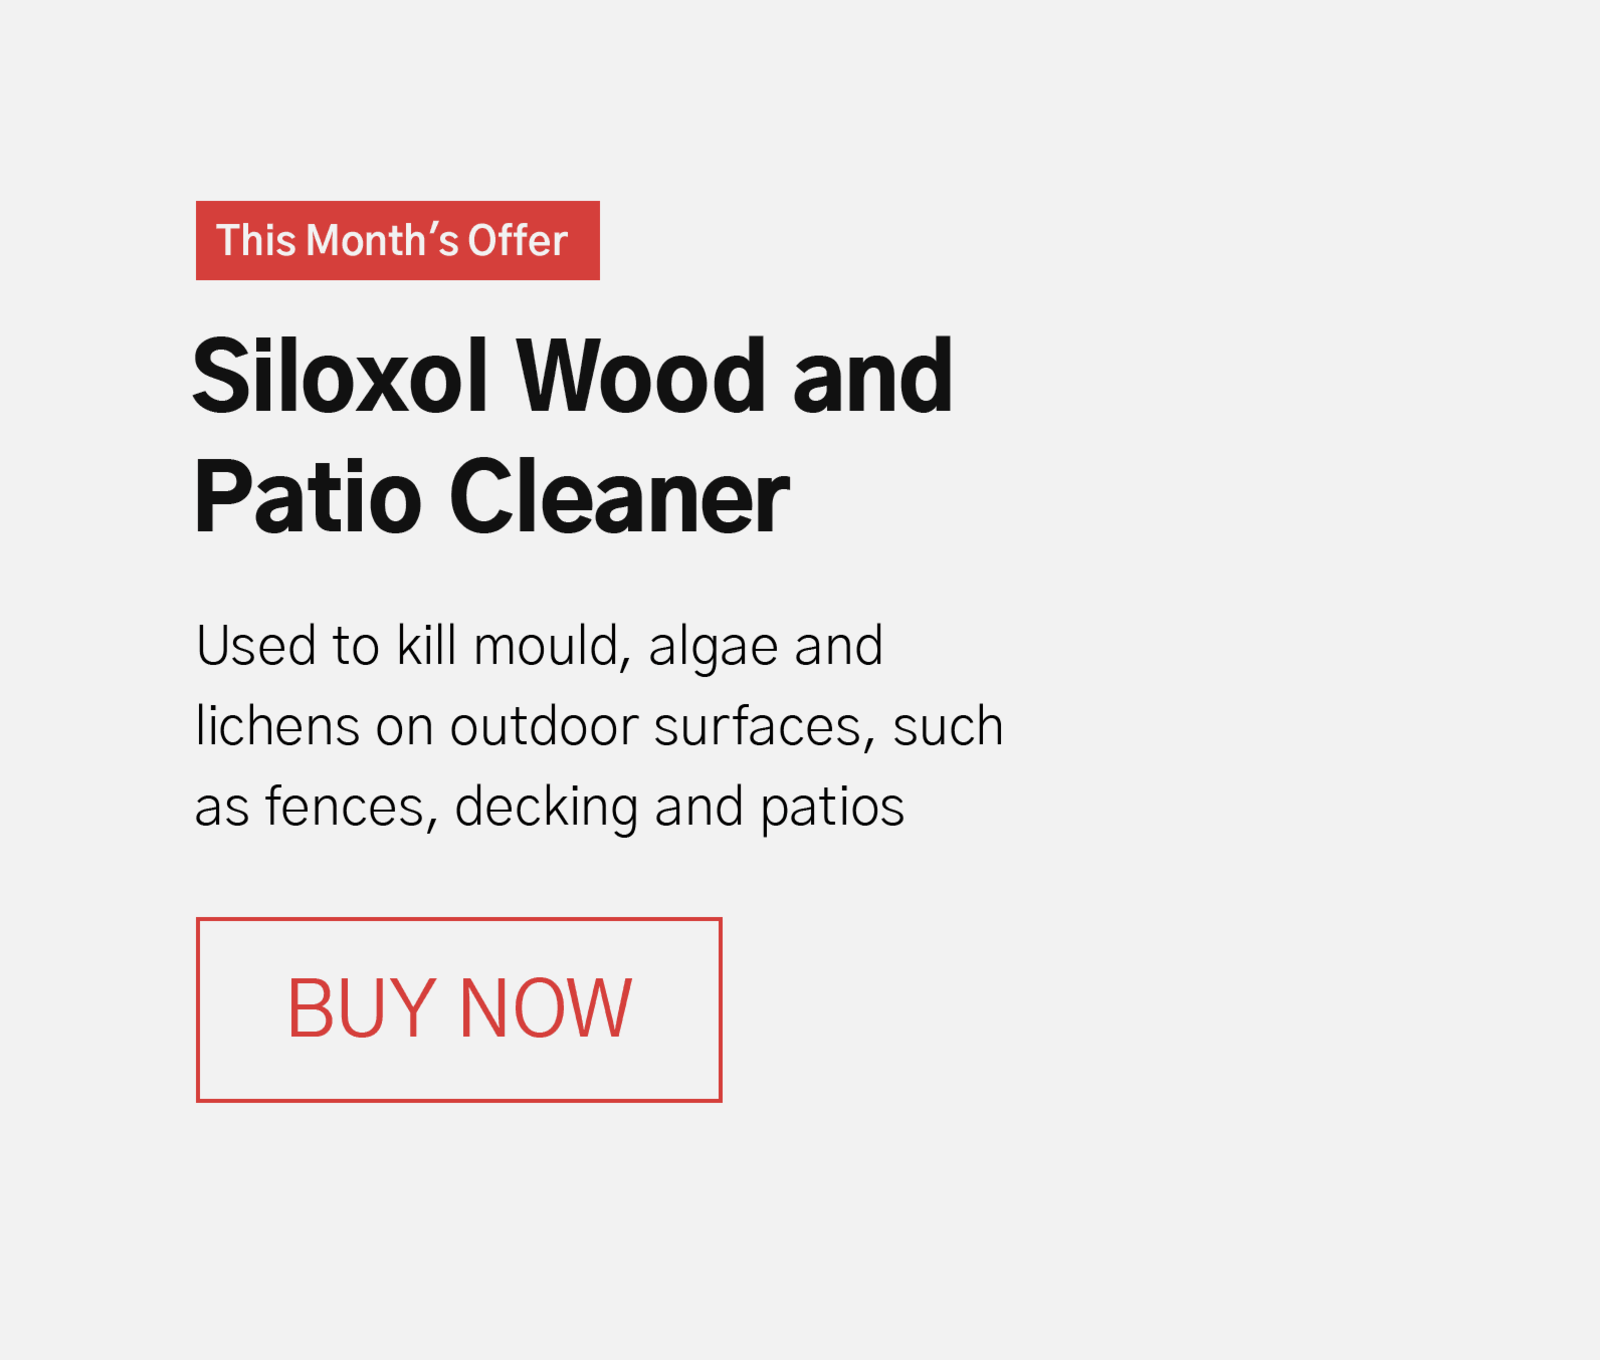 Siloxol Wood and Patio Cleaner